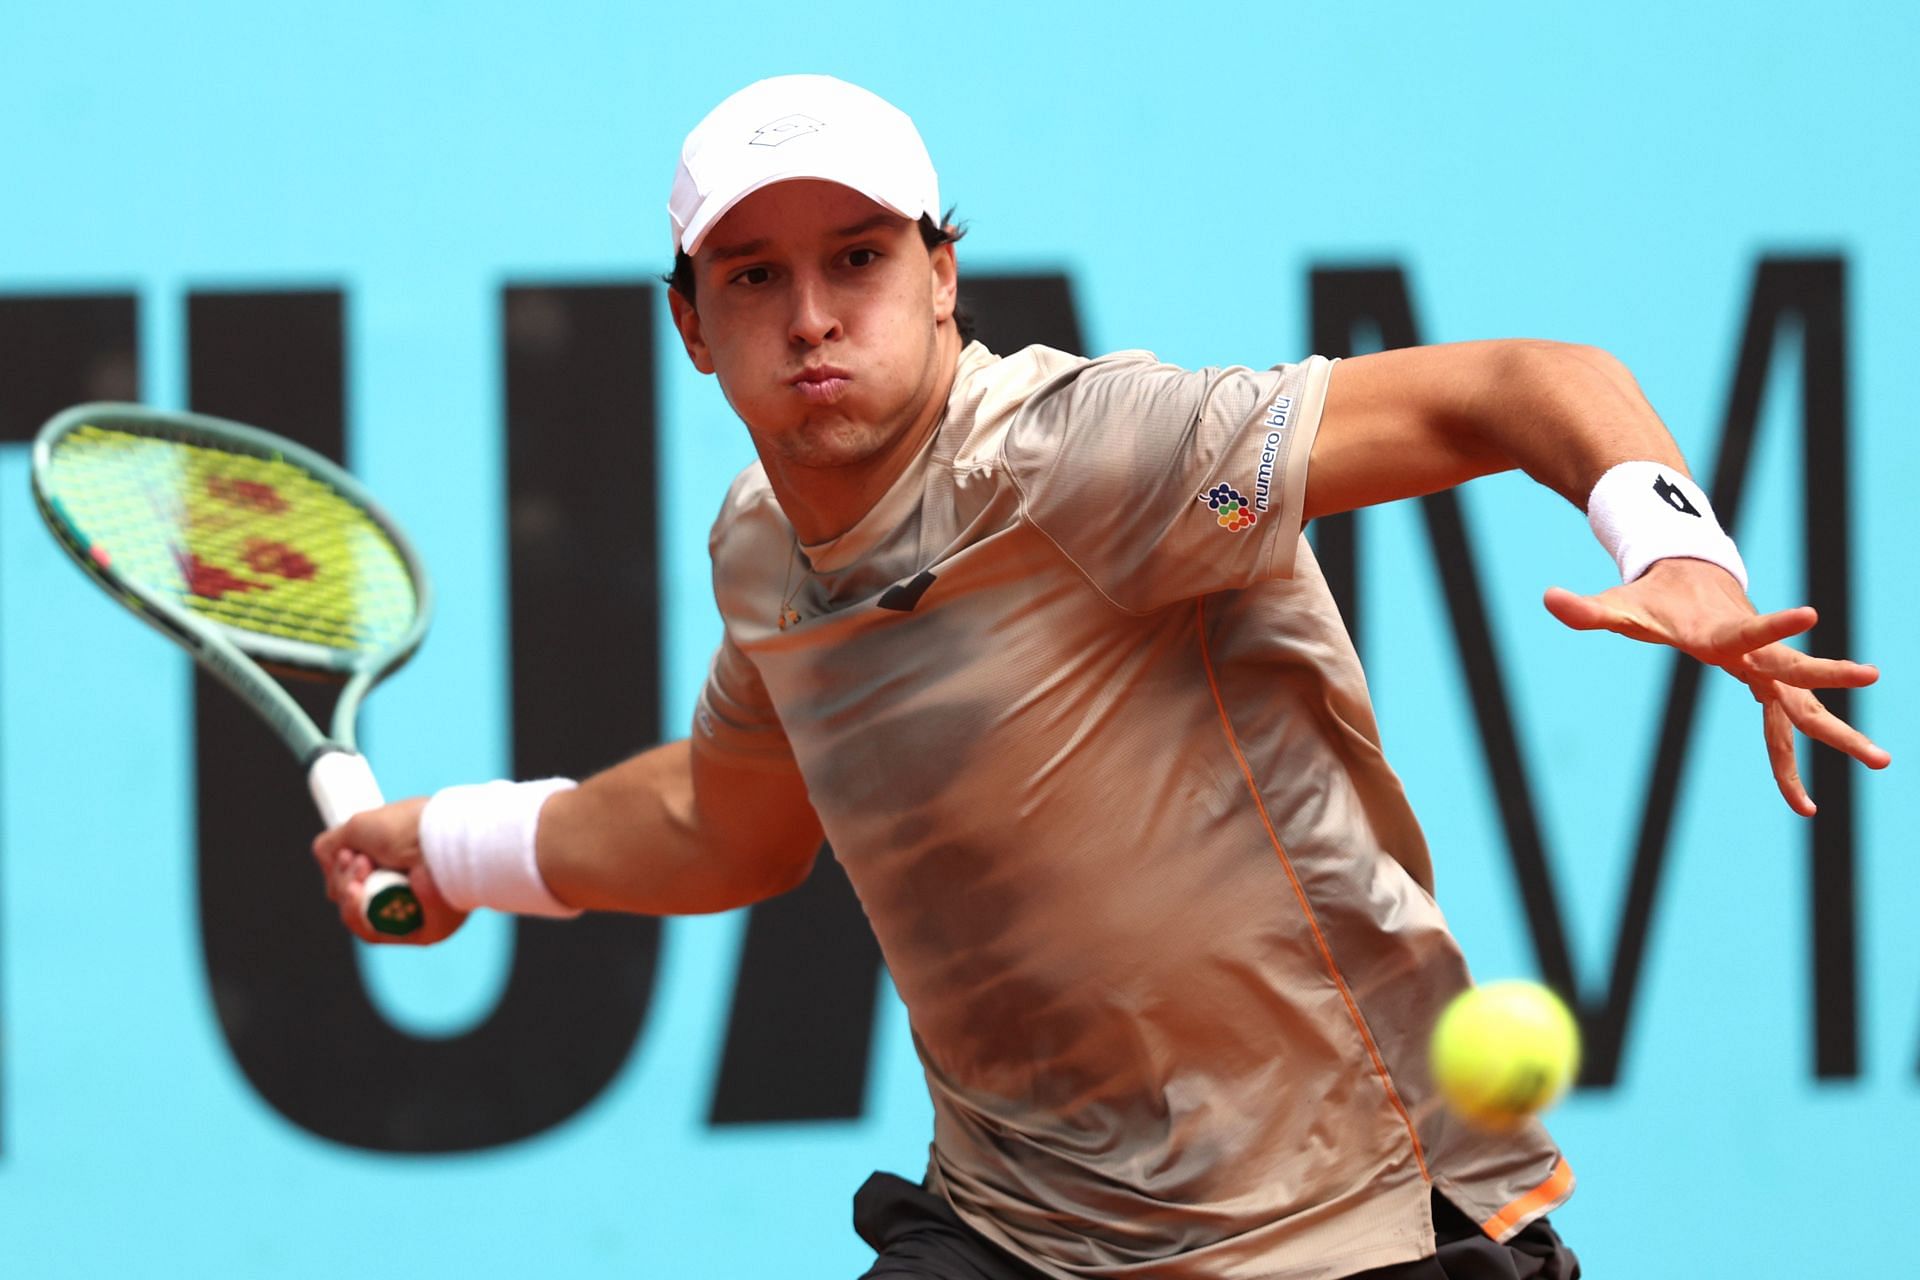 Darderi at the Mutua Madrid Open - Day Four